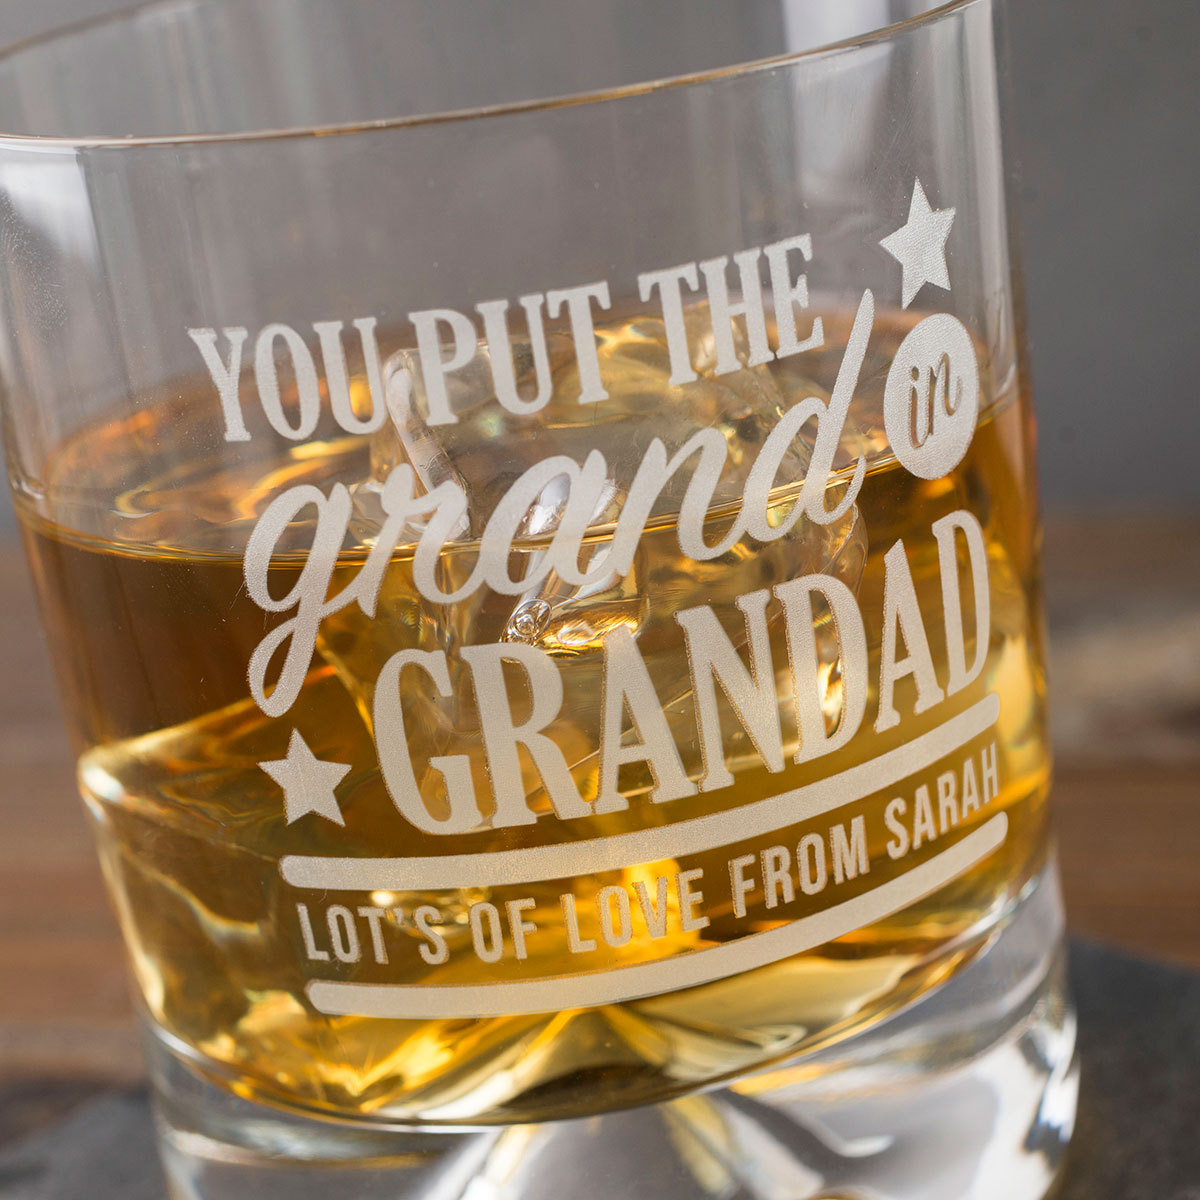 Engraved Stern Whisky Glass - Put The Grand In Grandad